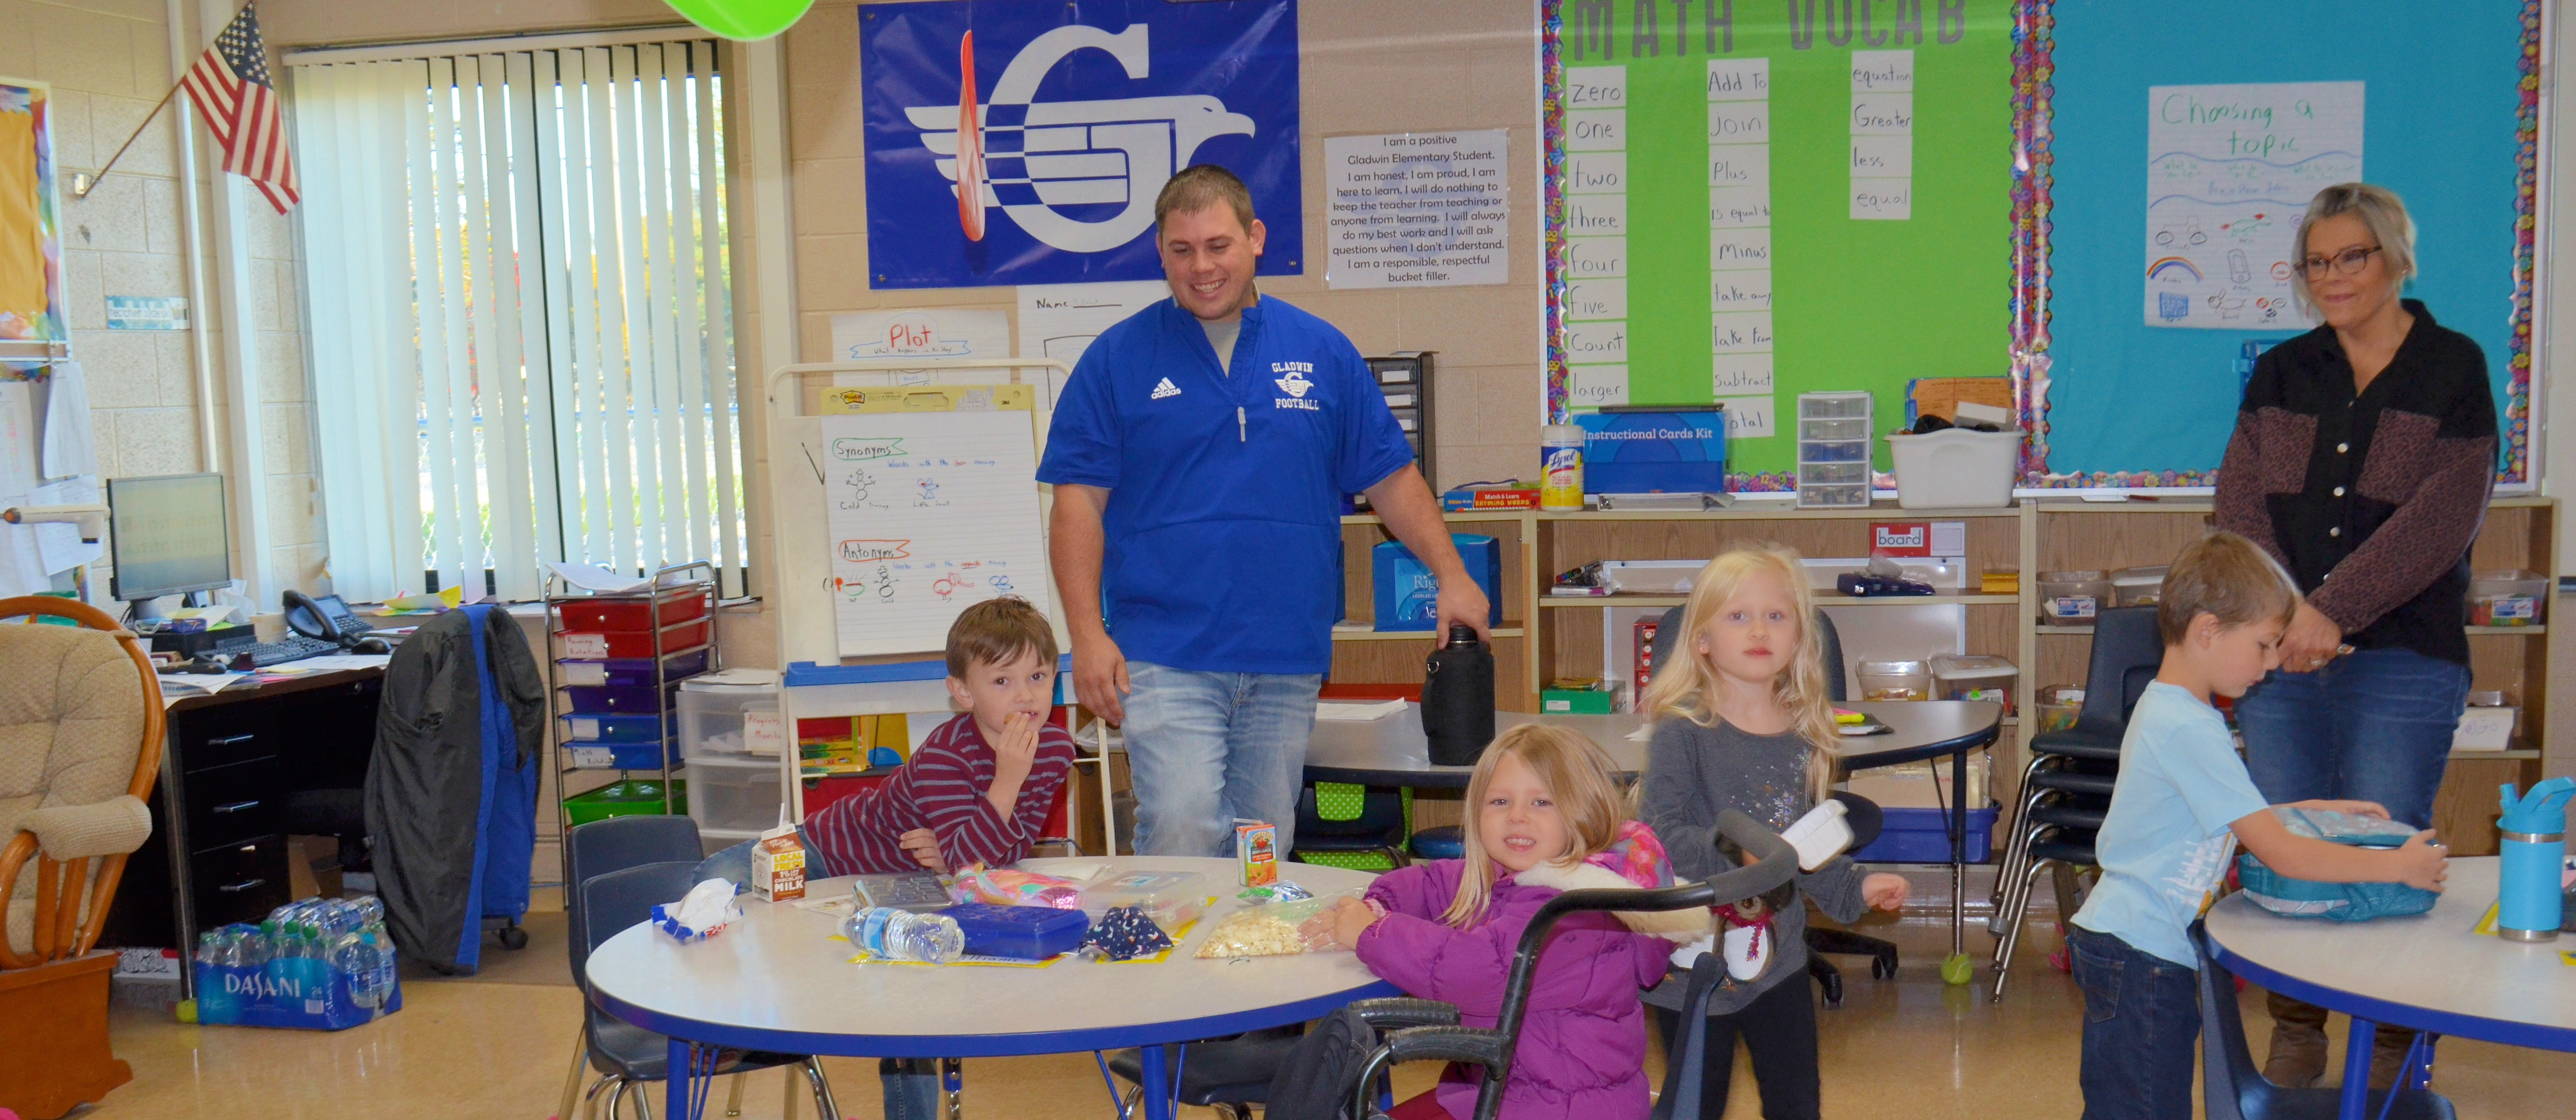 Gladwin Elementary Staff and Students